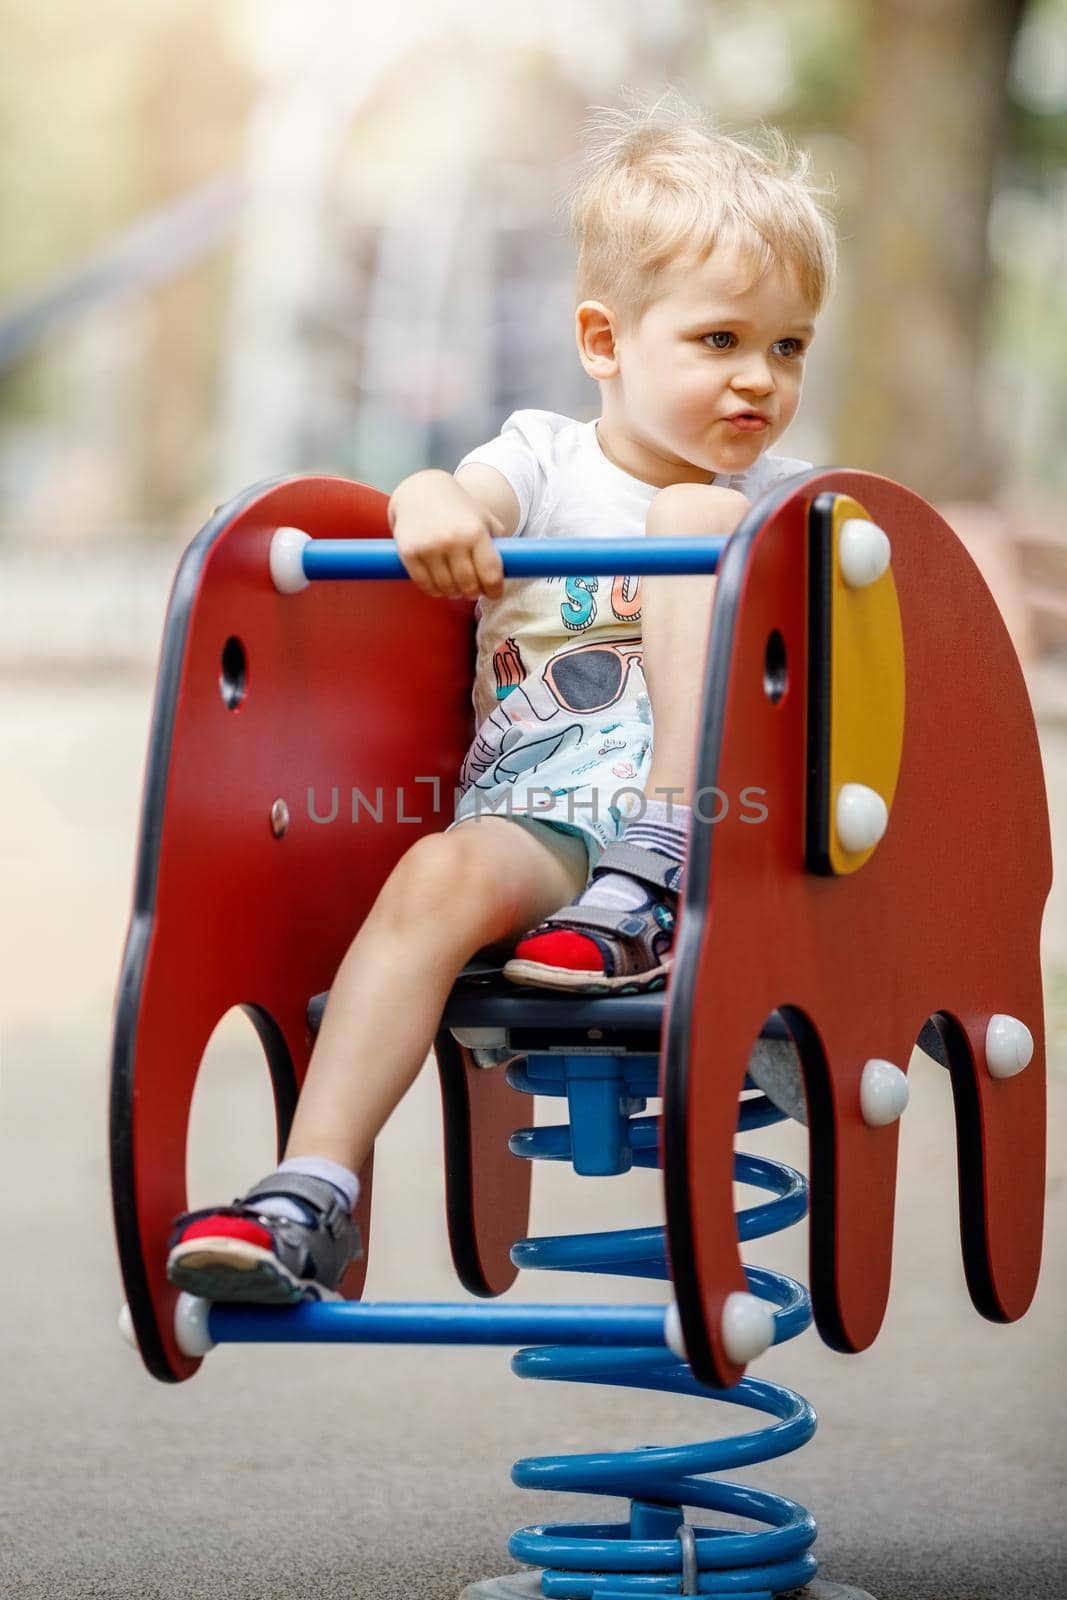 The blond little boy swings on a springy elephant-shaped swing on the playground during the summer.